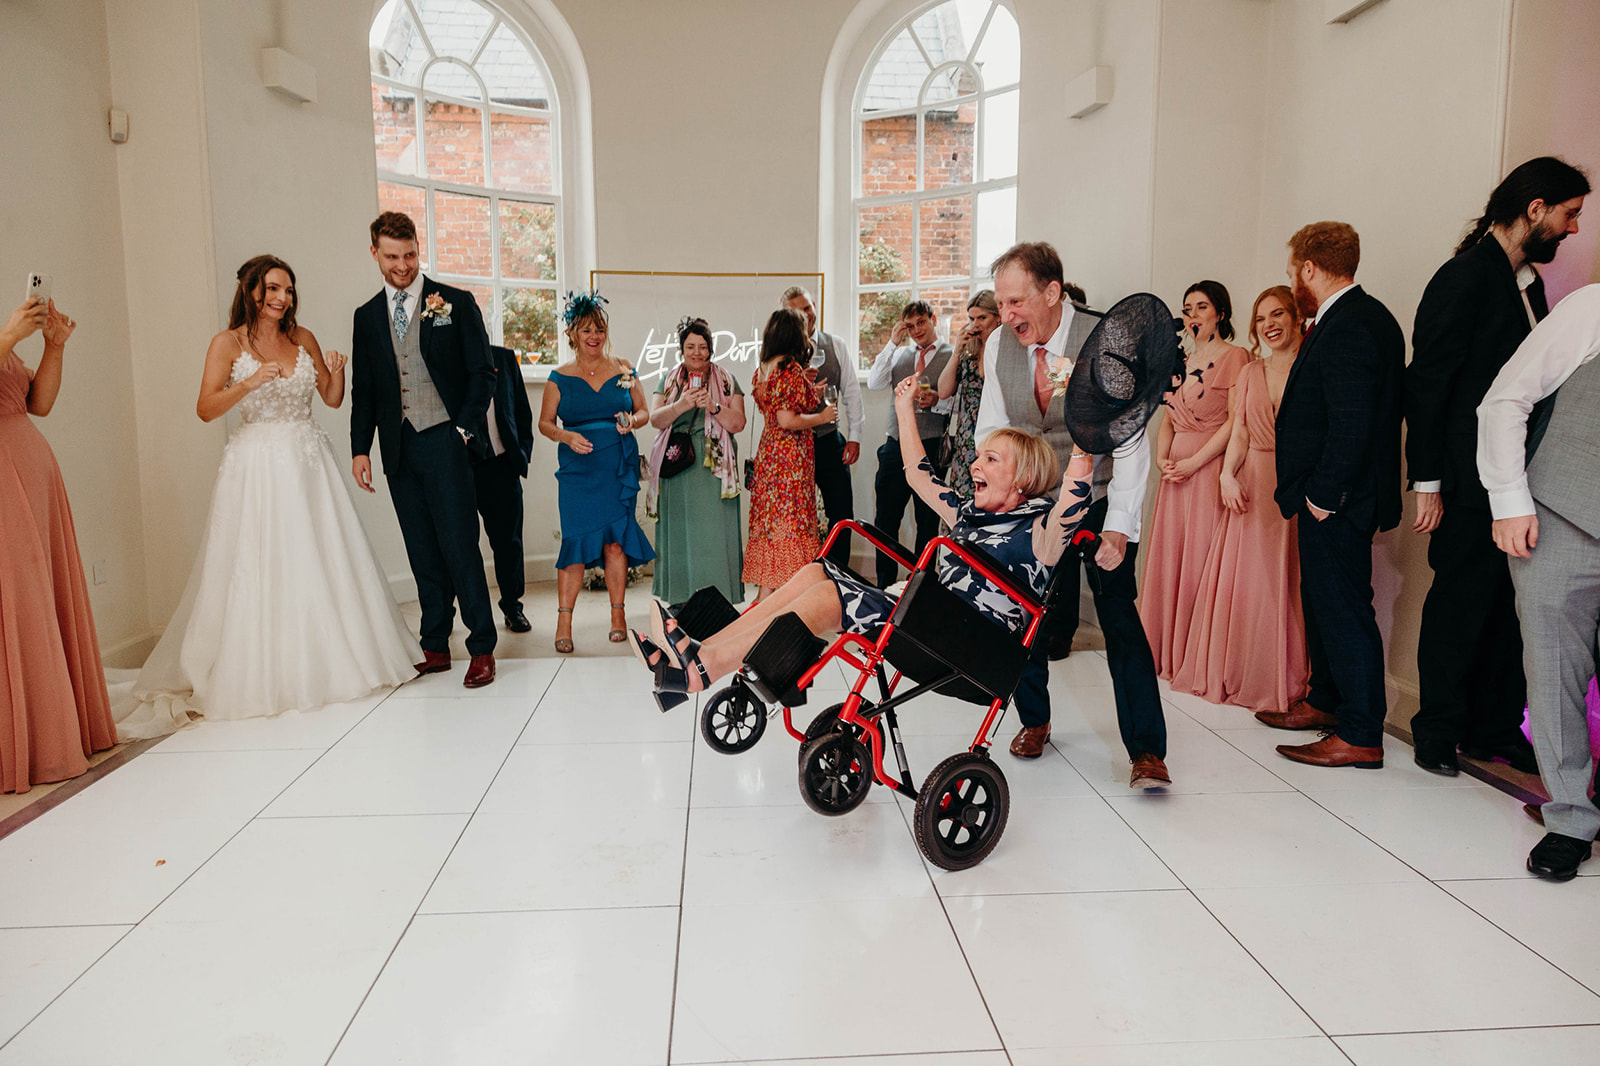 Candid shot of the groom's mother, grinning in a wheelchair, pushed enthusiastically by a man at wedding party